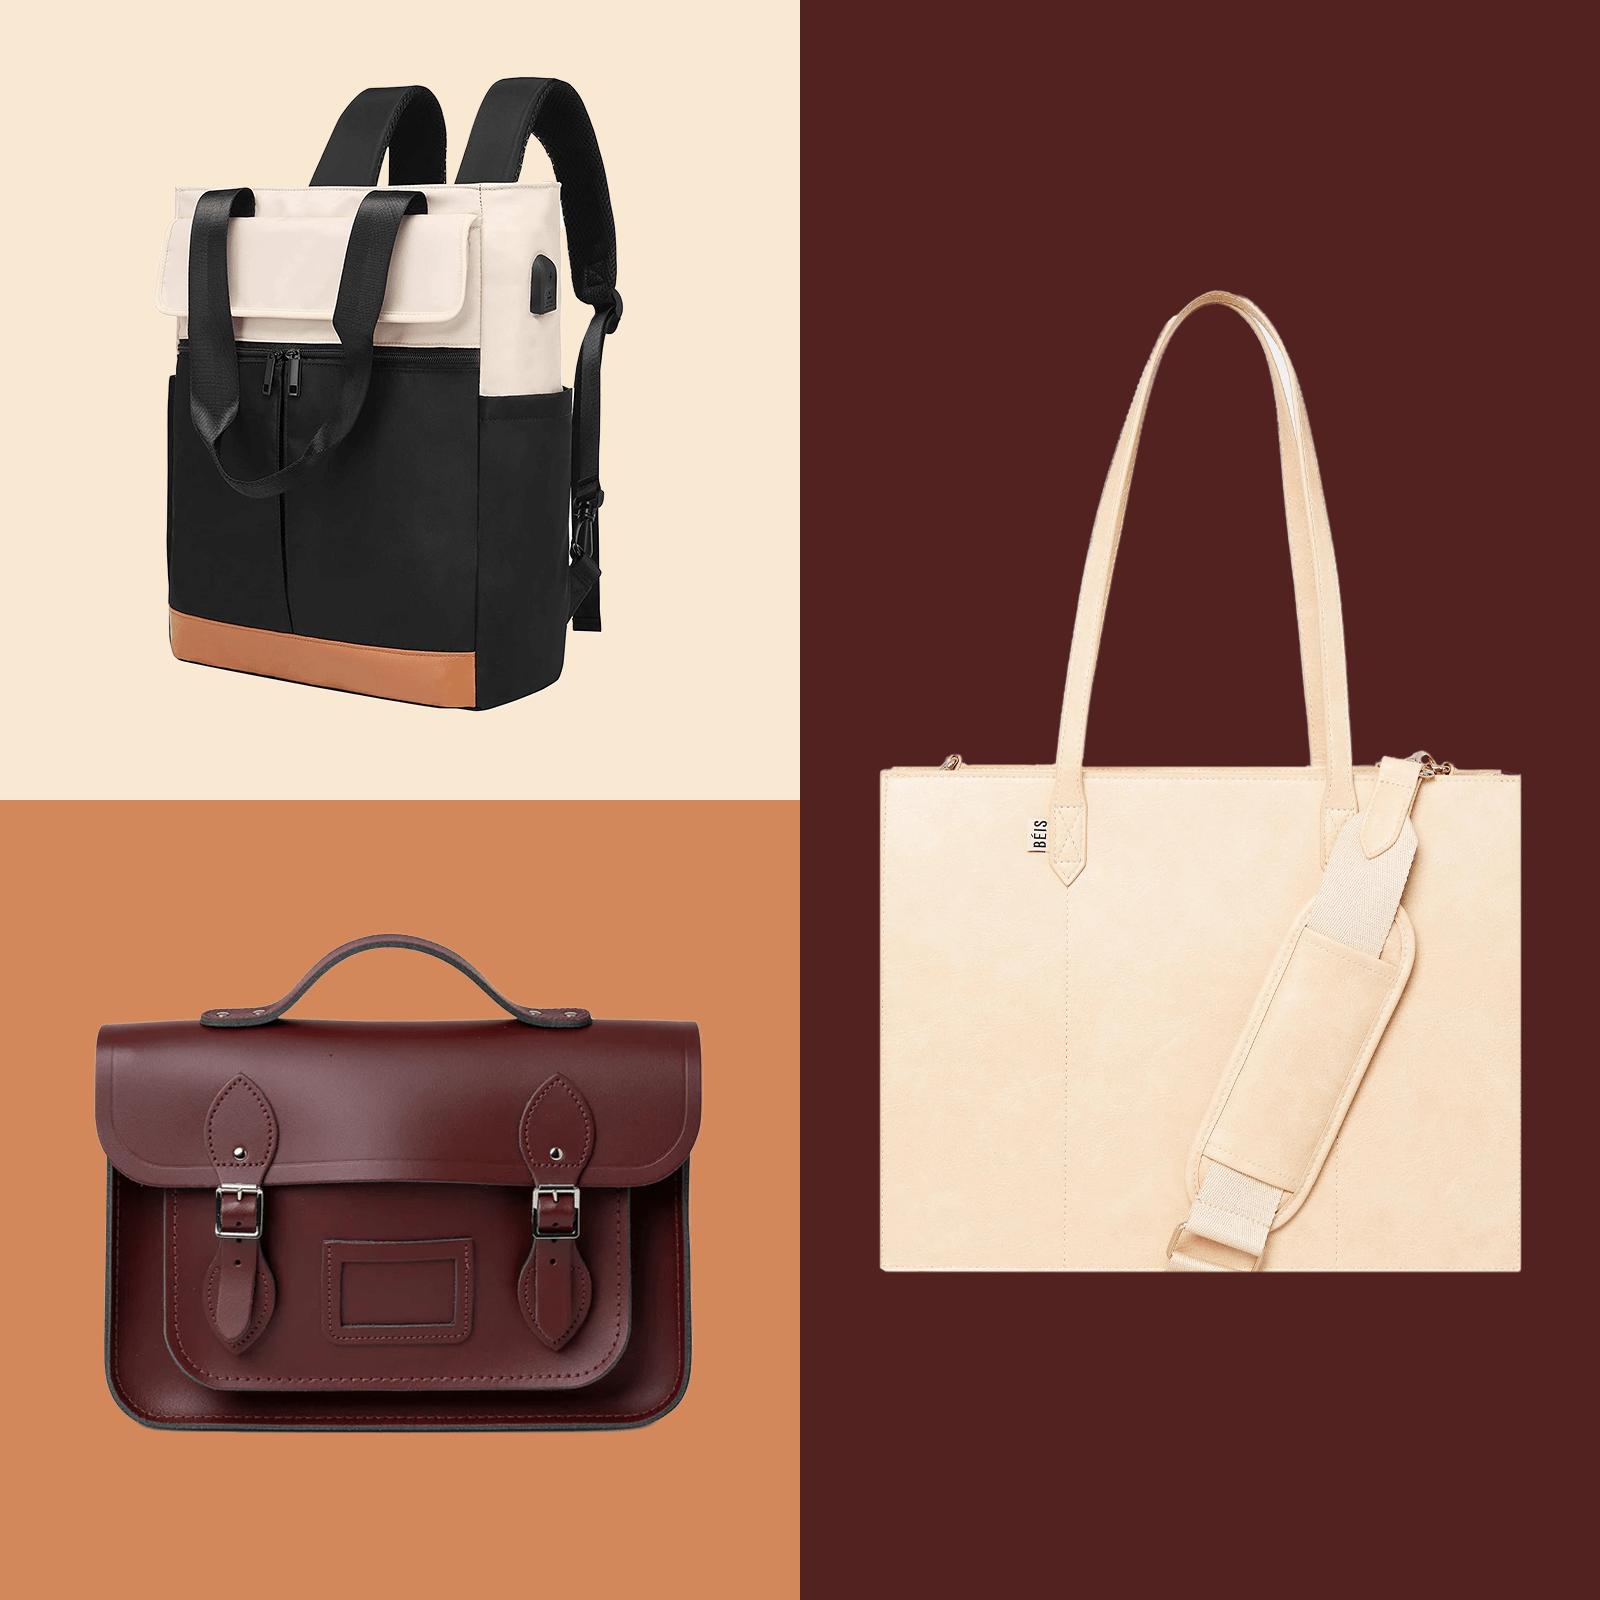 https://www.rd.com/wp-content/uploads/2023/01/12-stylish-and-functional-bags-ft-via-merhcant.png